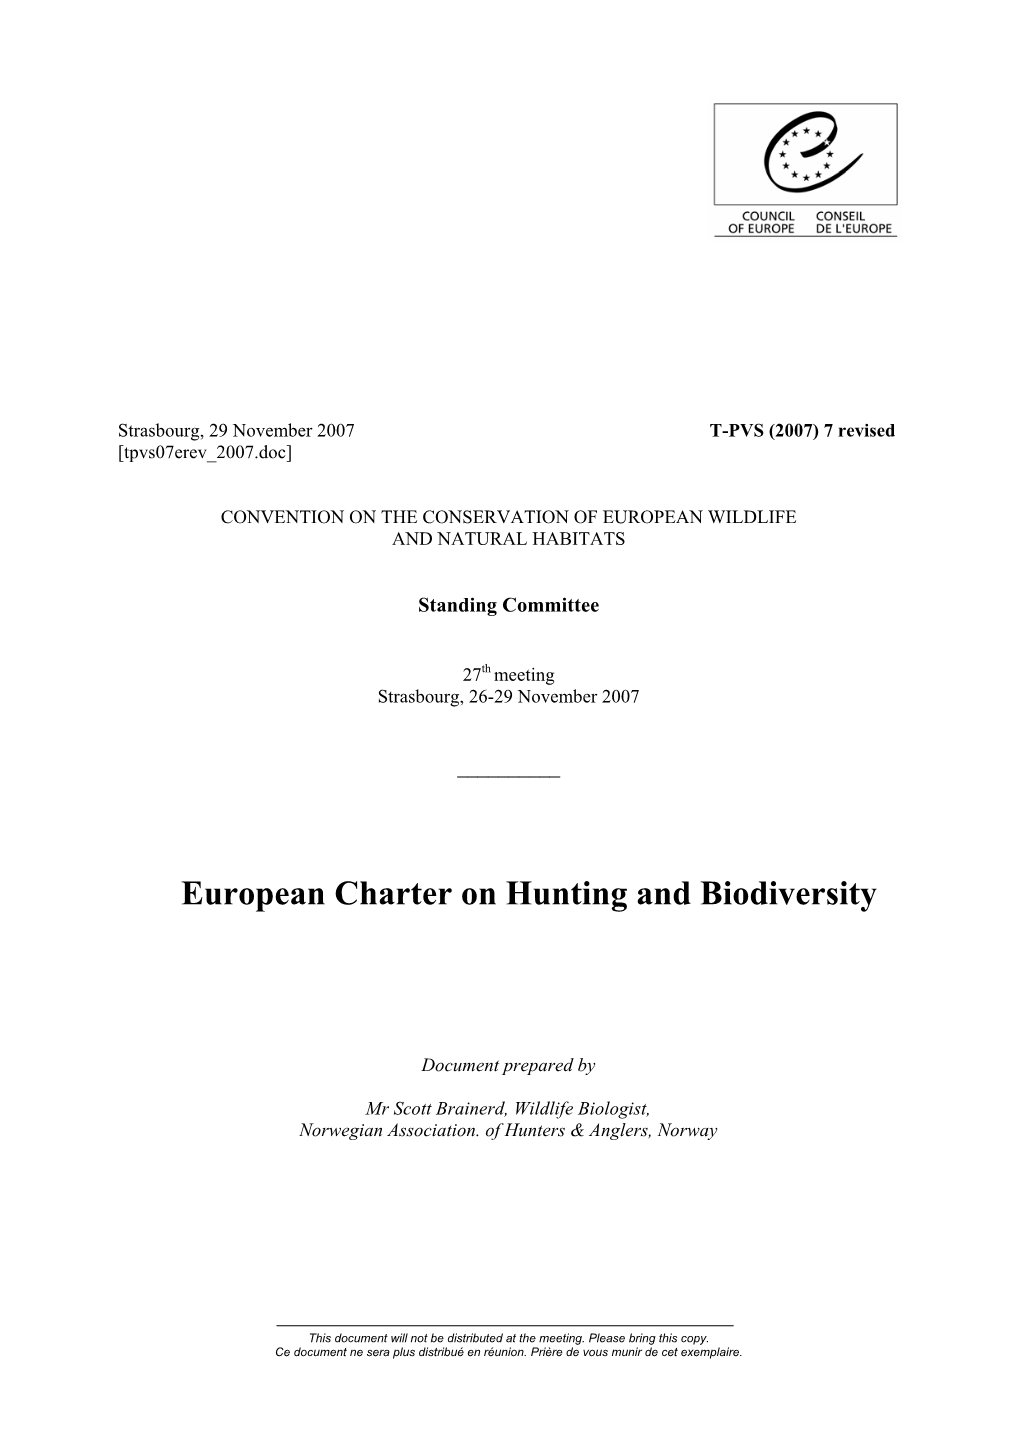 European Charter on Hunting and Biodiversity